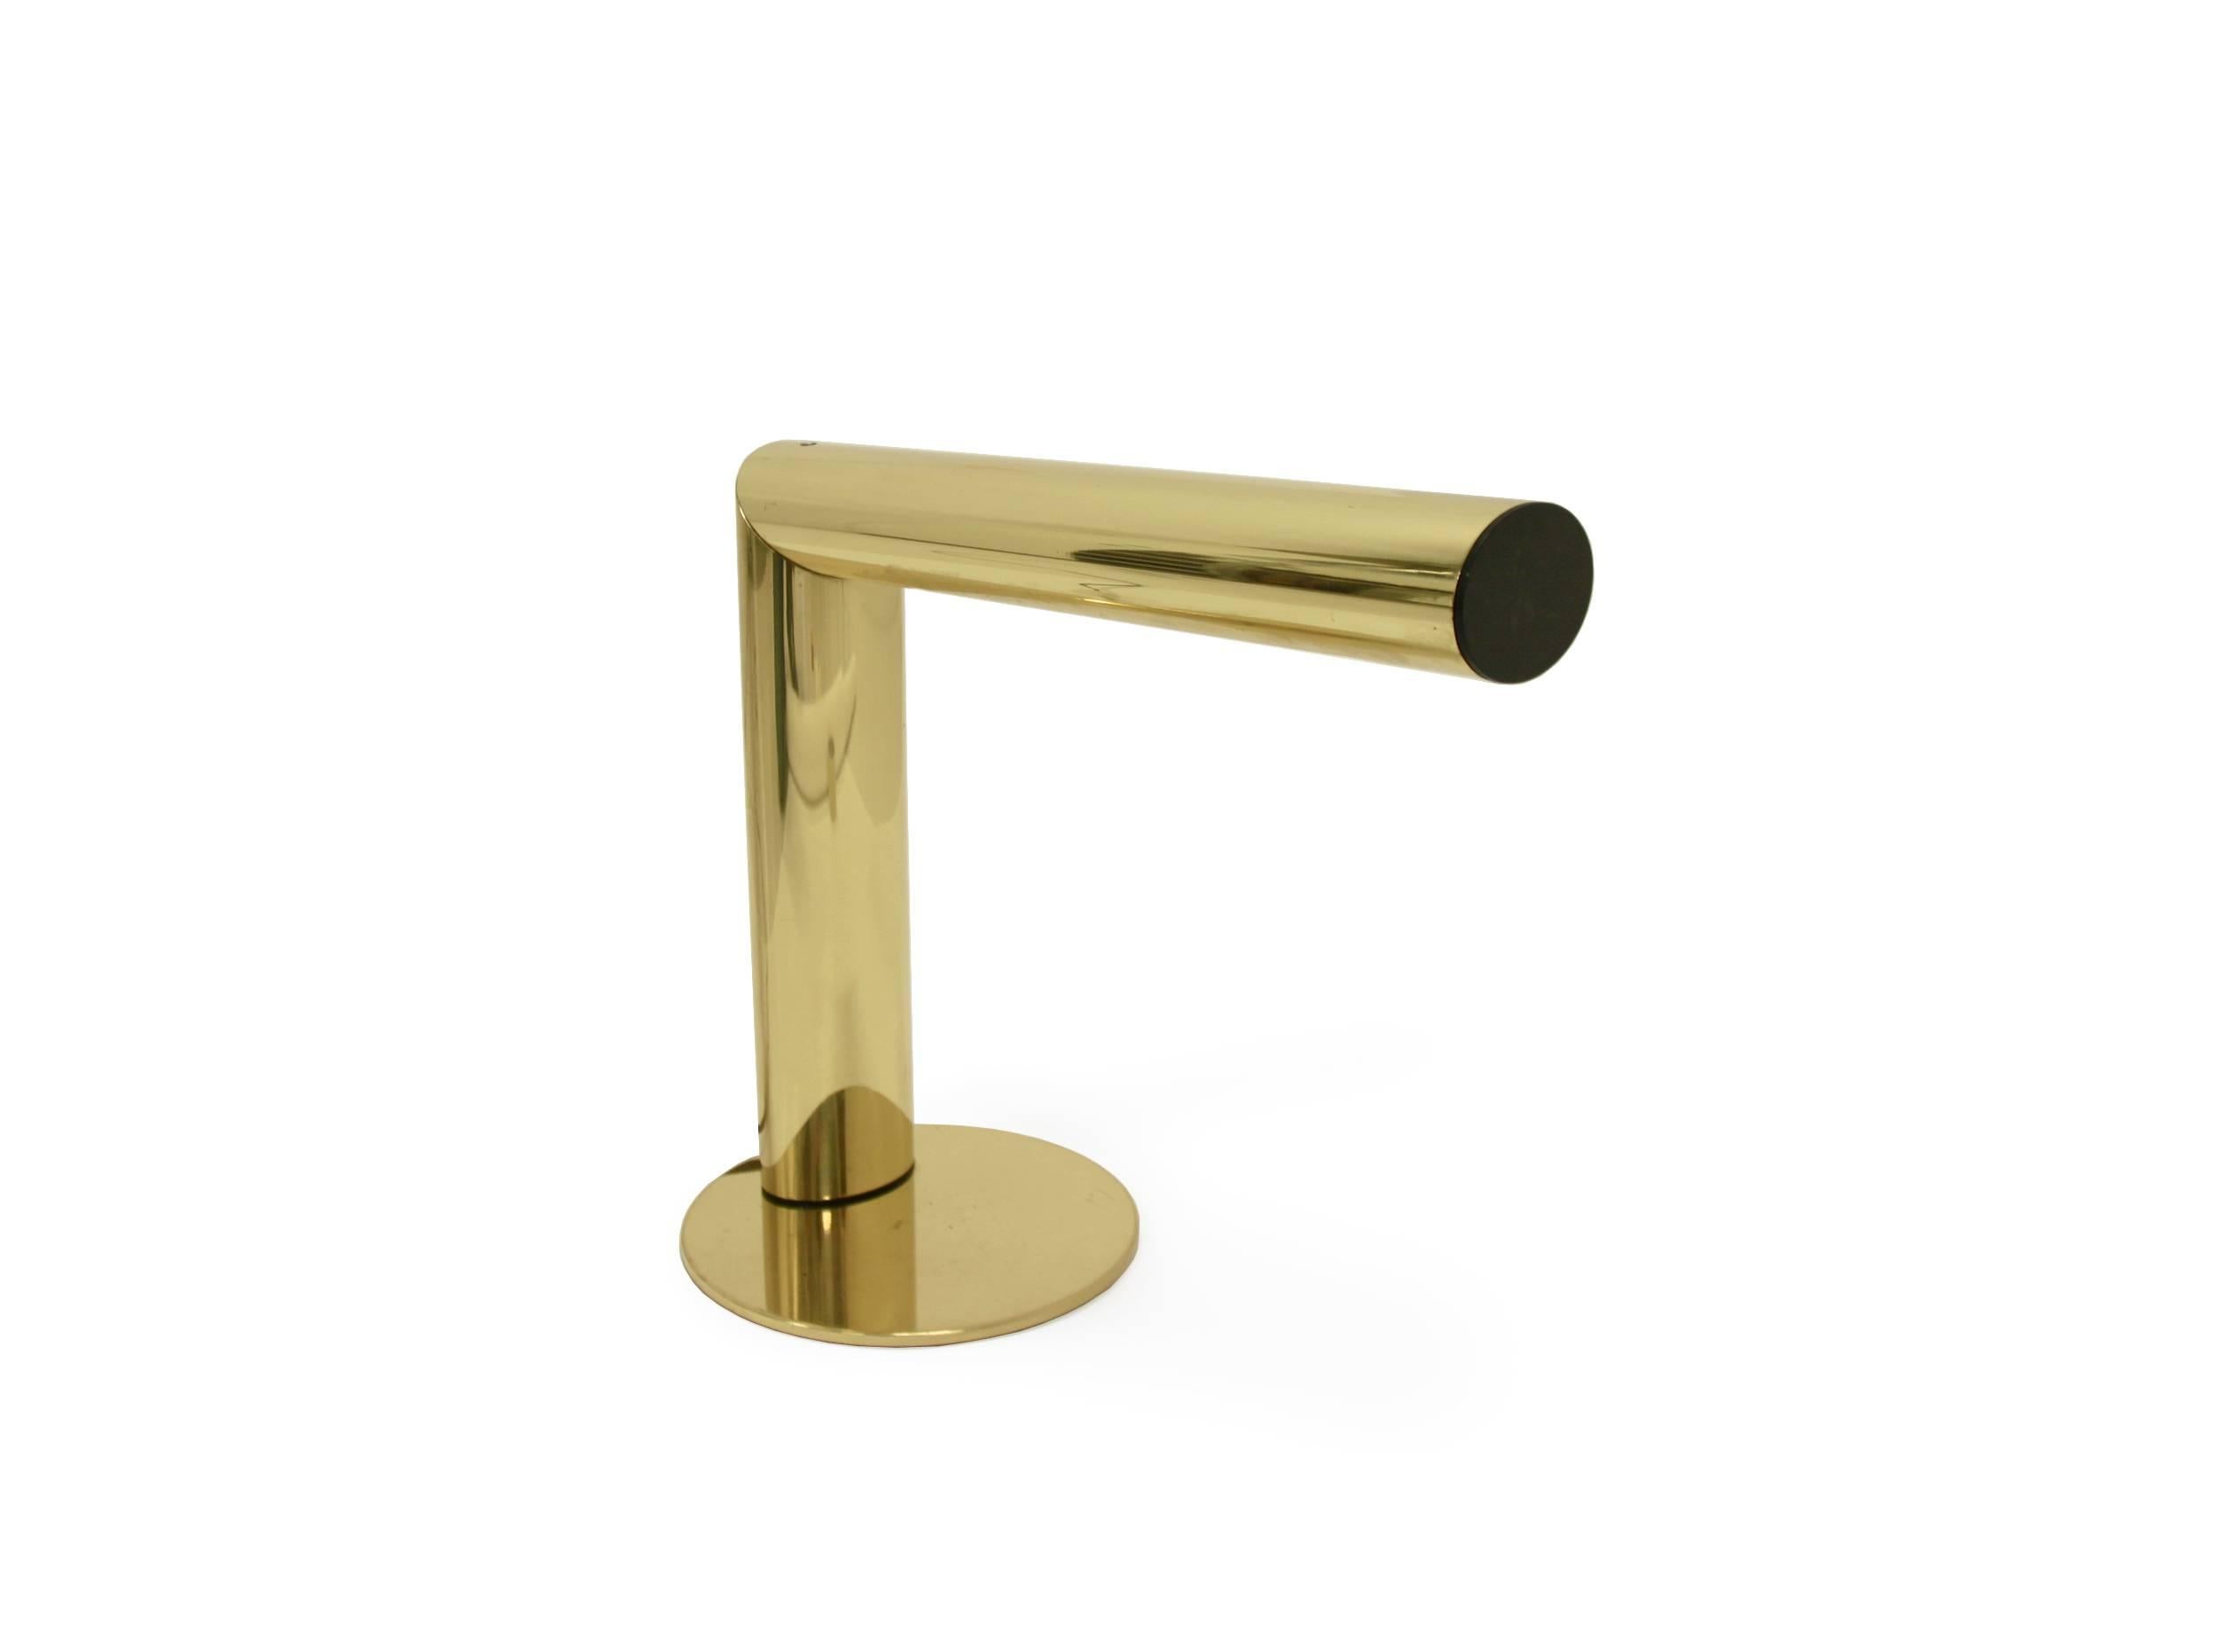 Wonderful and minimalist table lamp on a brass frame with revolving lamp shade.

Designed by Jonas Hidle and made by Høvik Lys AS, Norway, circa 1980 second half.

The lamp is a remarkable example of Norwegian post modernist design produced in a